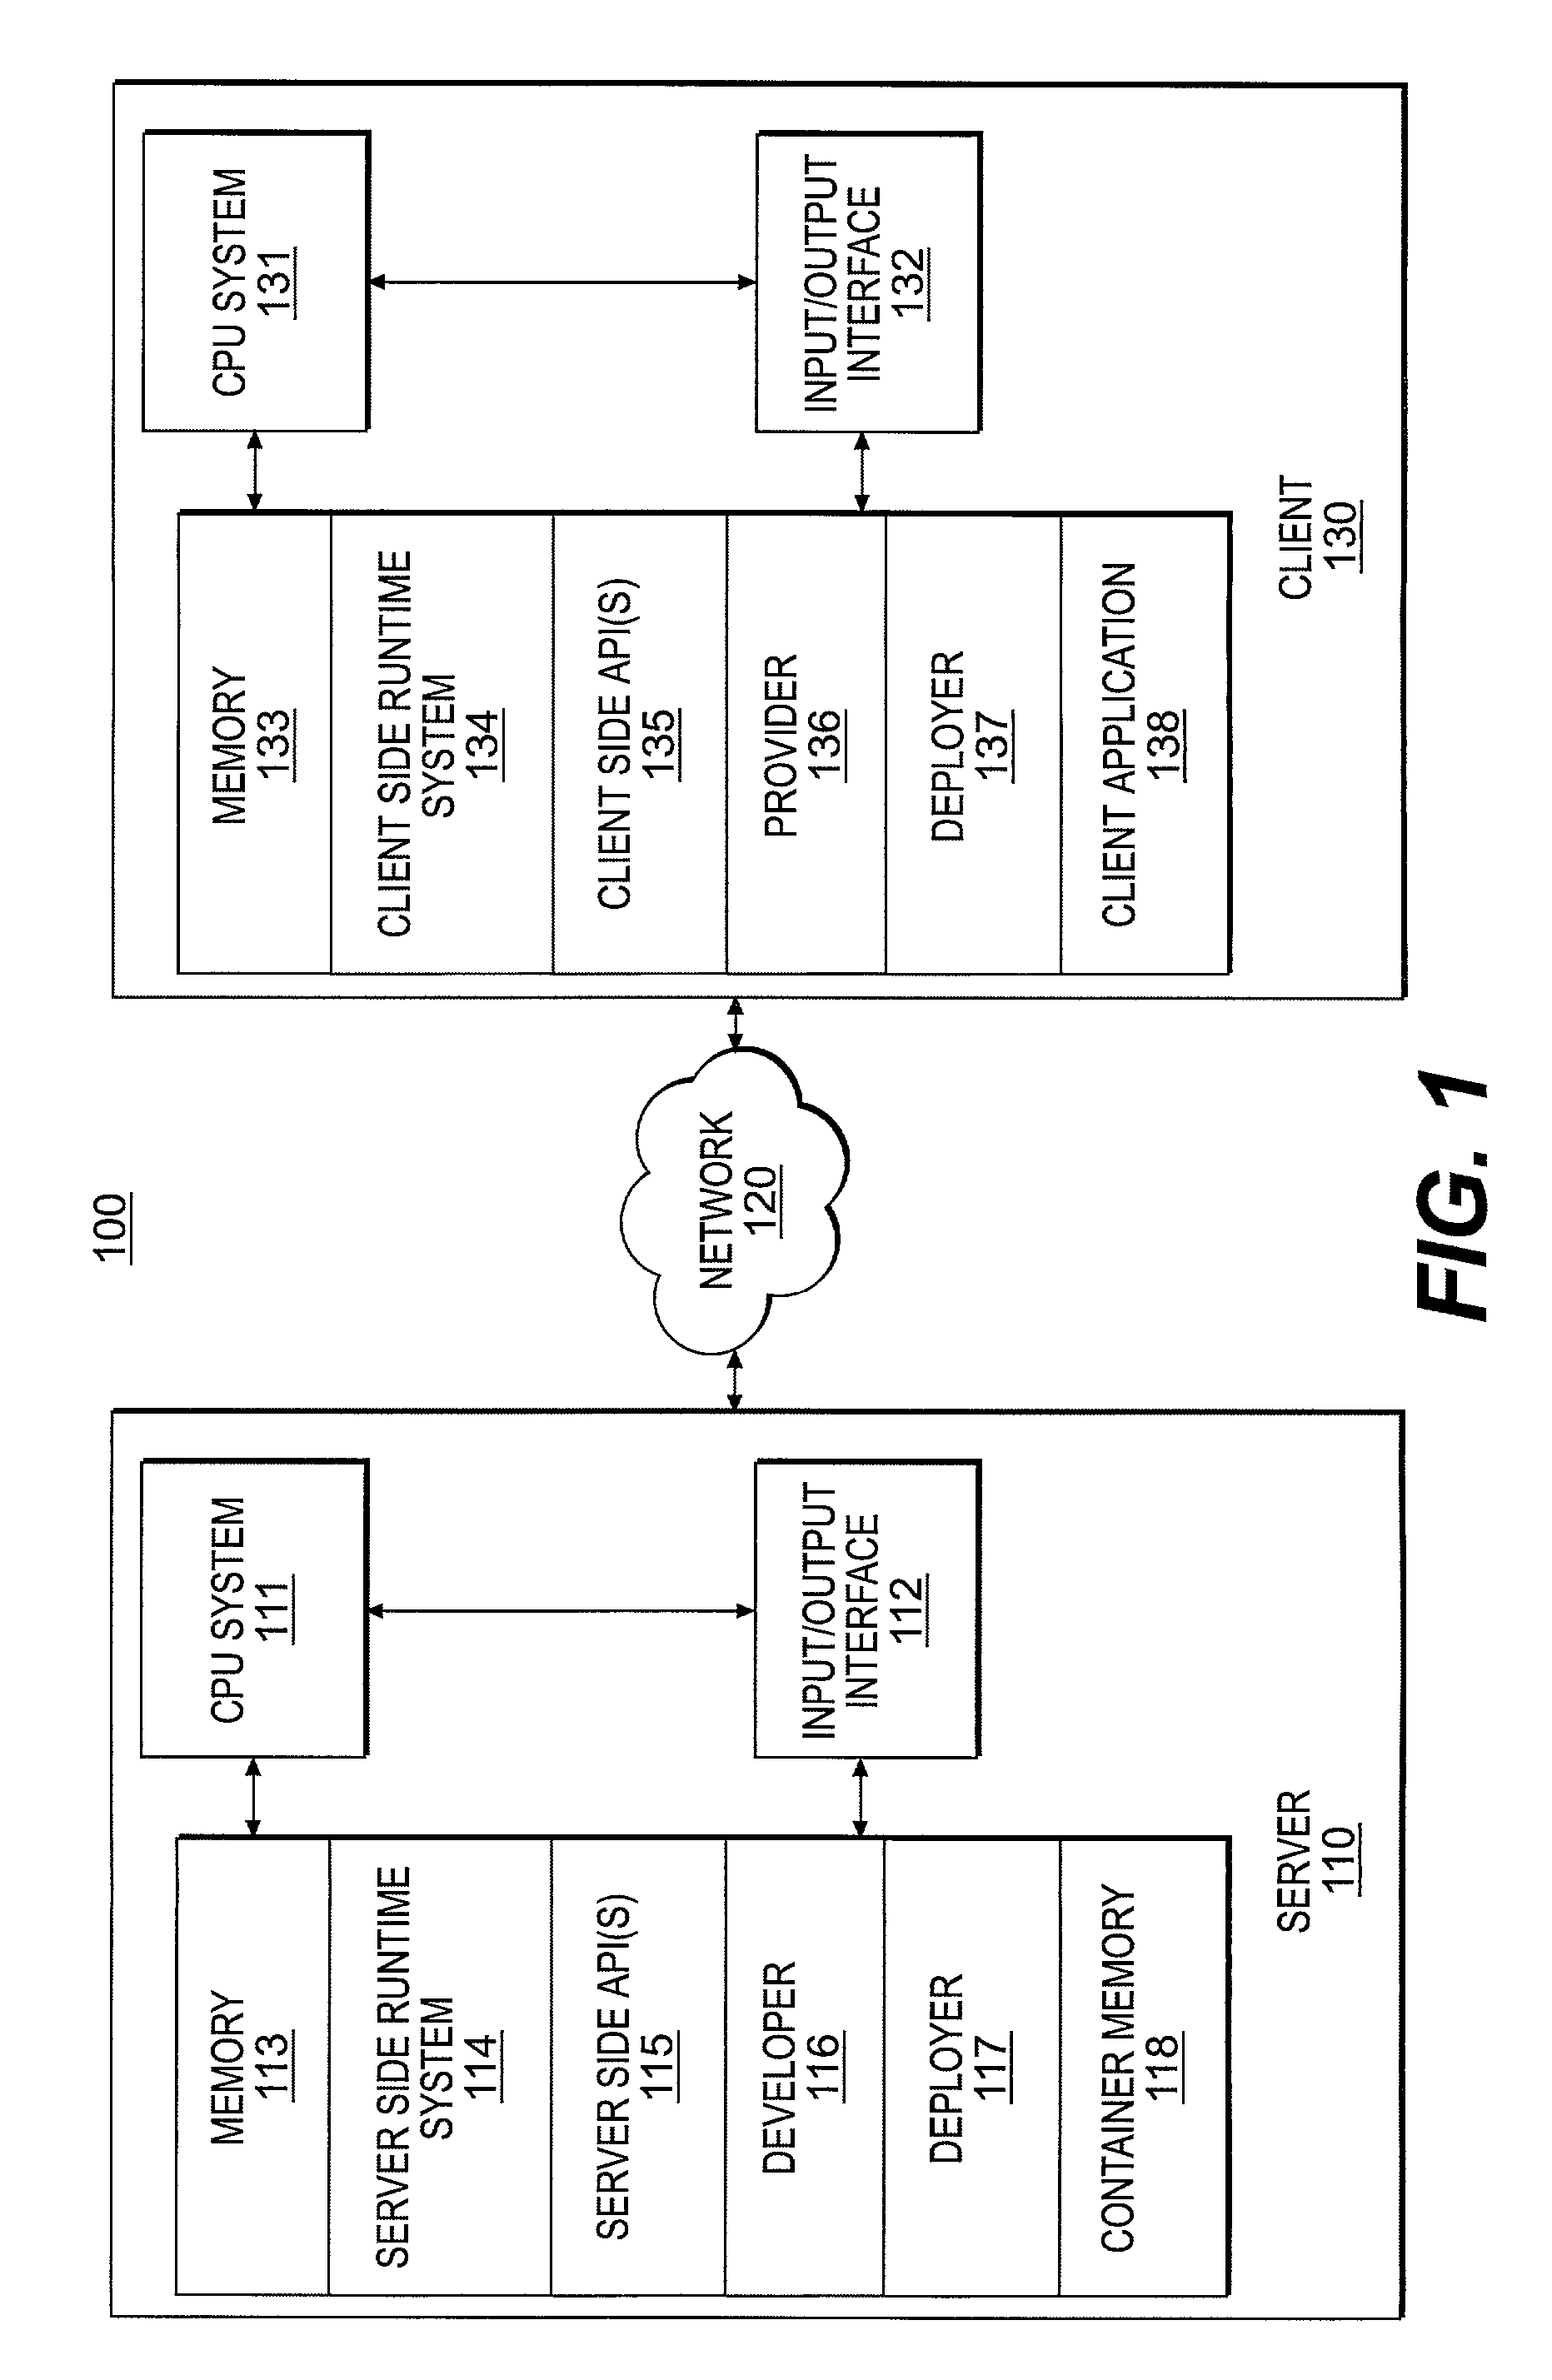 Methods, system and articles of manufacture for providing an extensible serialization framework for an XML based RPC computing environment